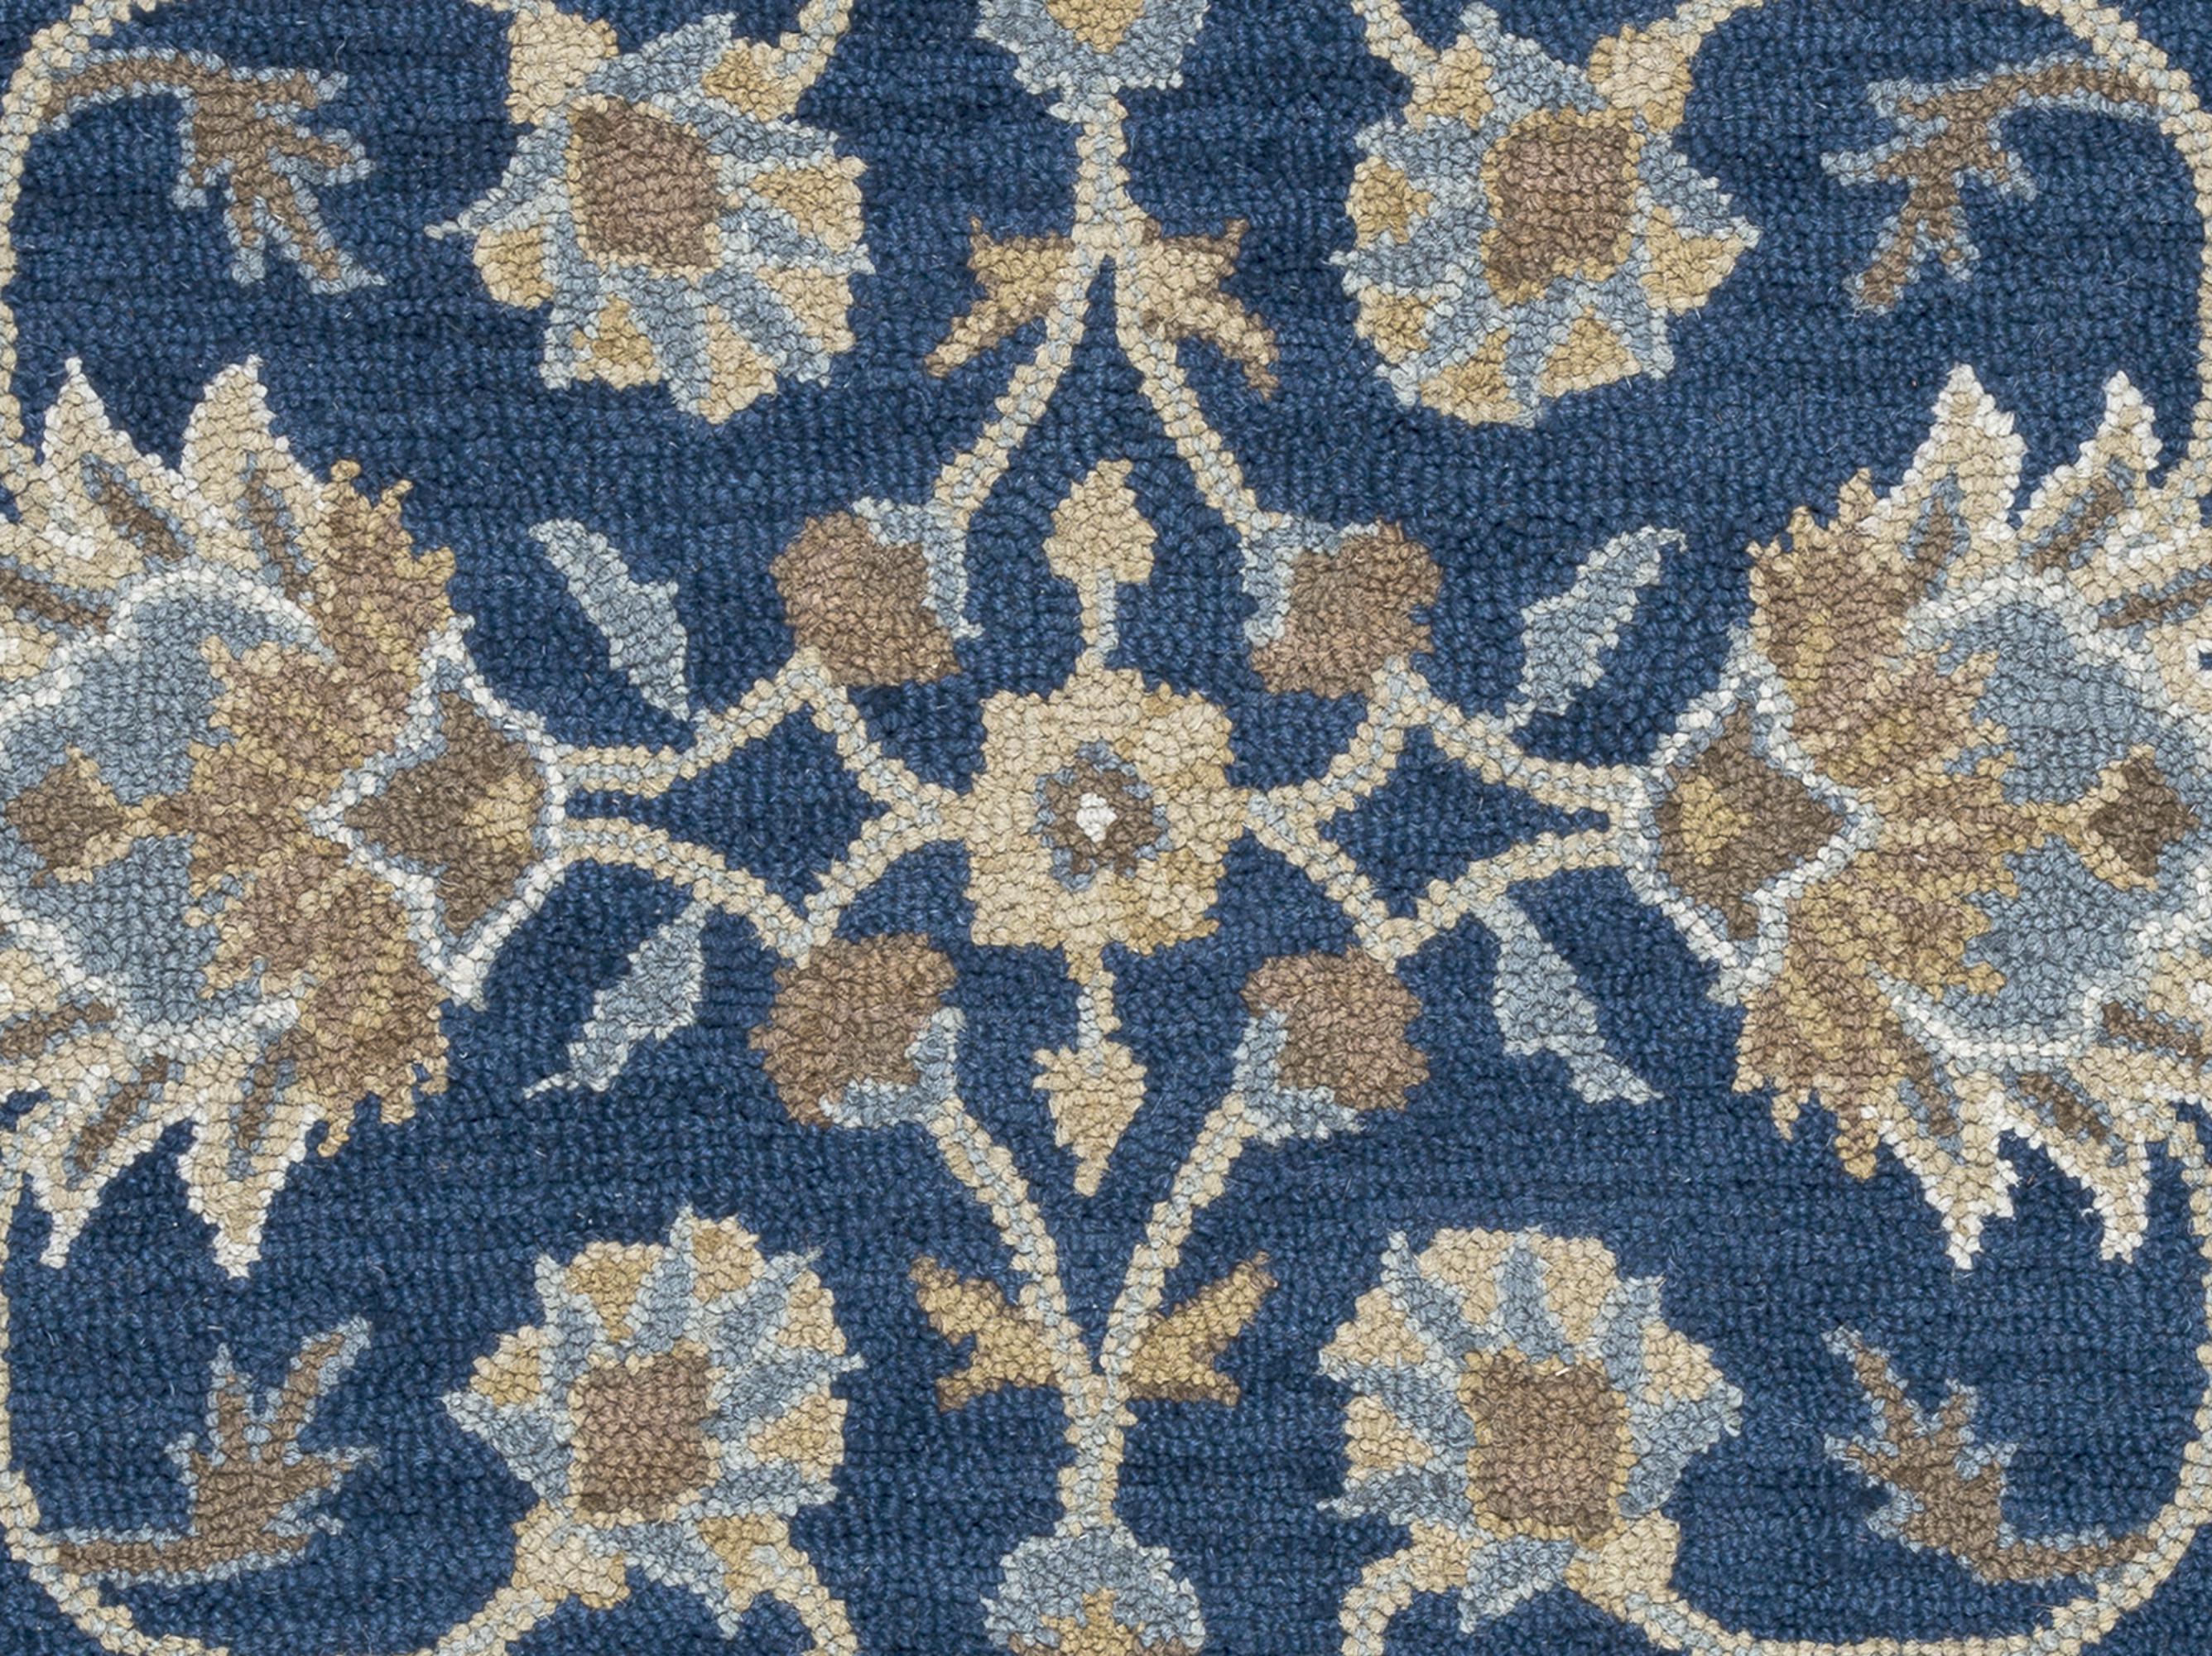 Rizzy Home AL2823 Blue 12' x 15' Hand-Tufted Area Rug - image 4 of 5